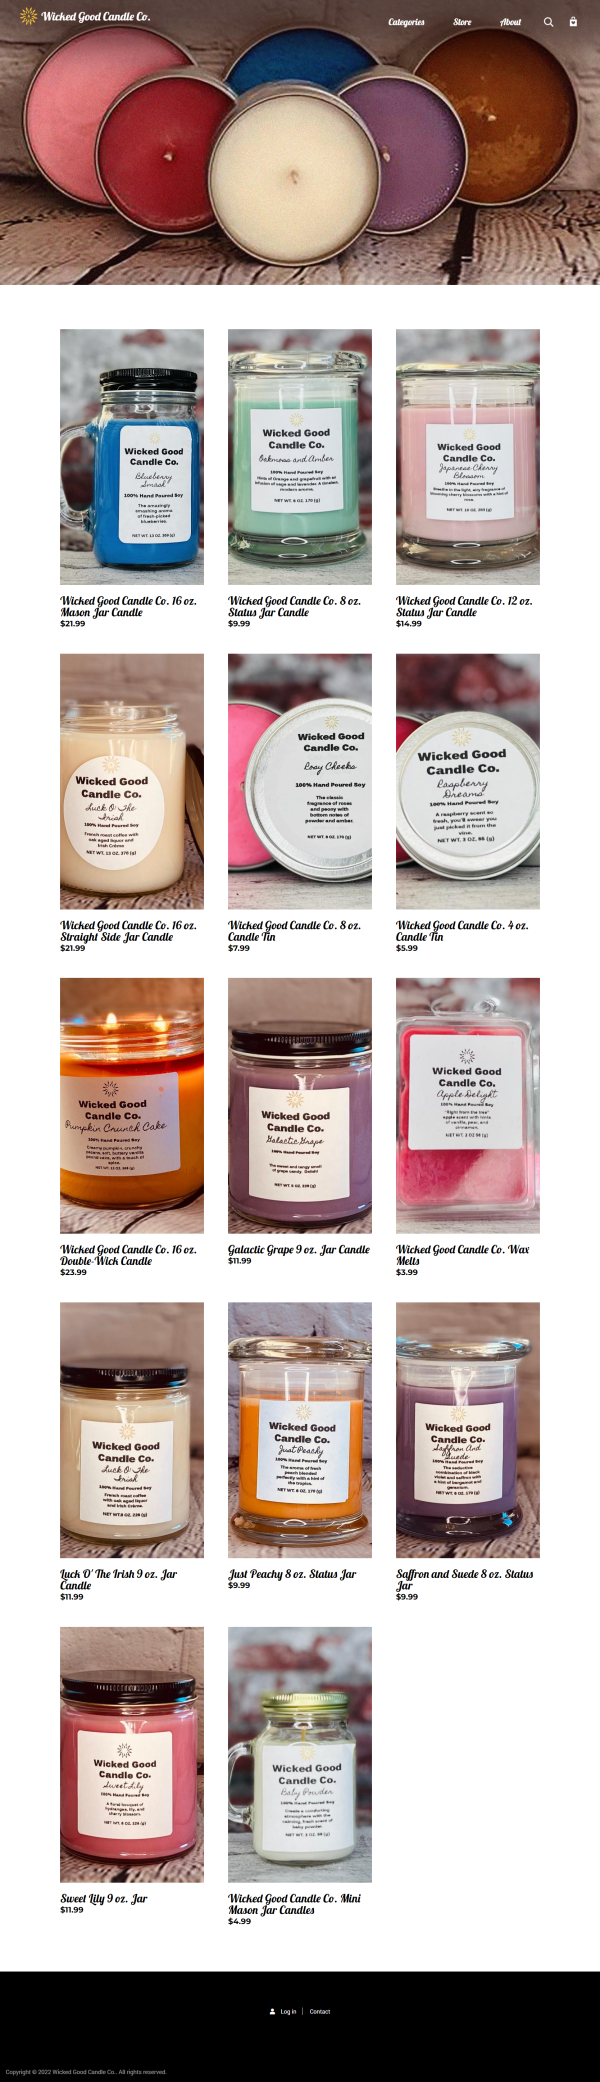 Wicked Good Candle Co.